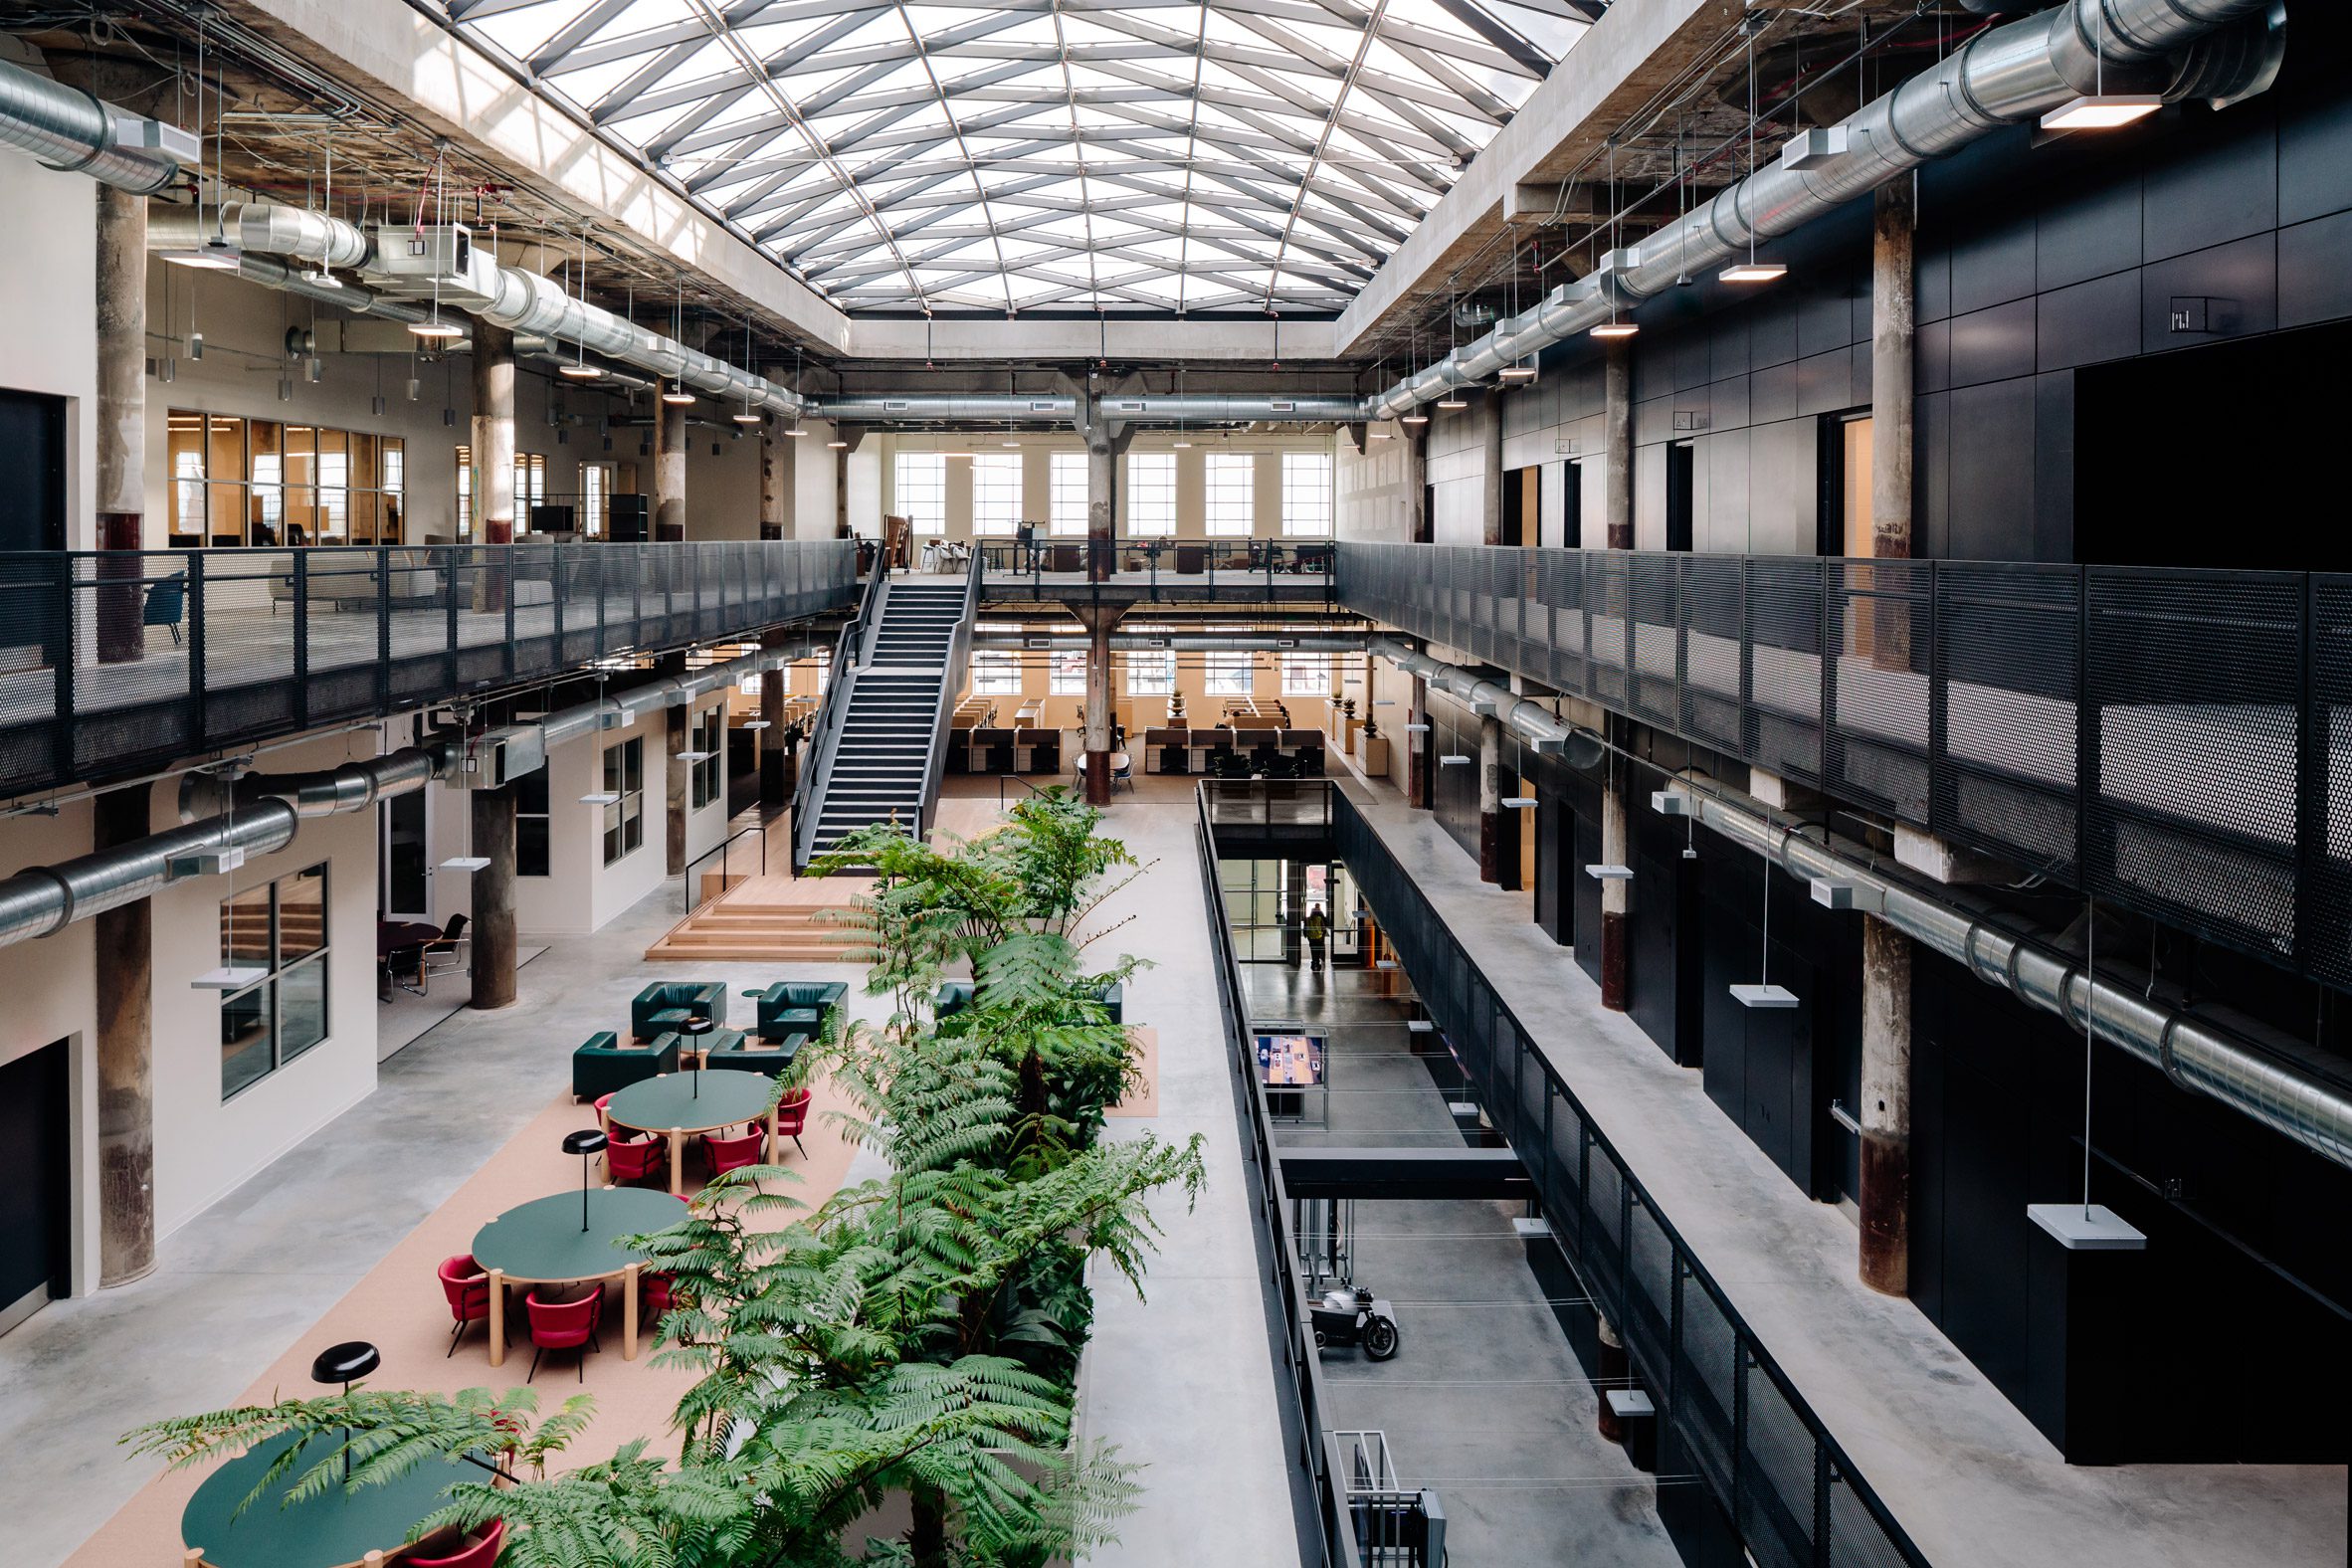 Interior atrium space with large skylight and open-plan co-working space